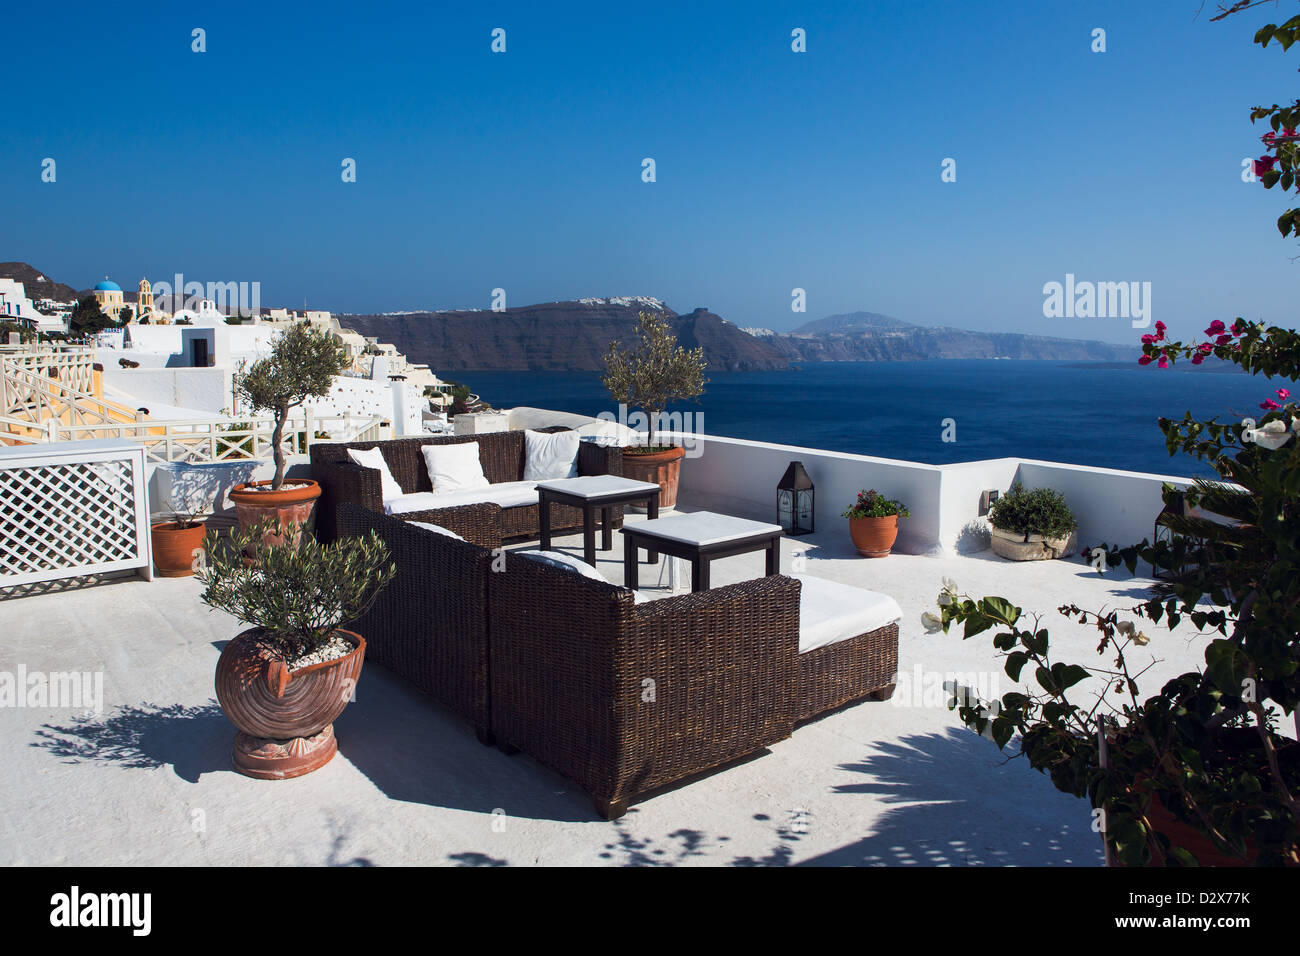 Room setting on the roof of a house in Oia Santorini, Greece. Stock Photo